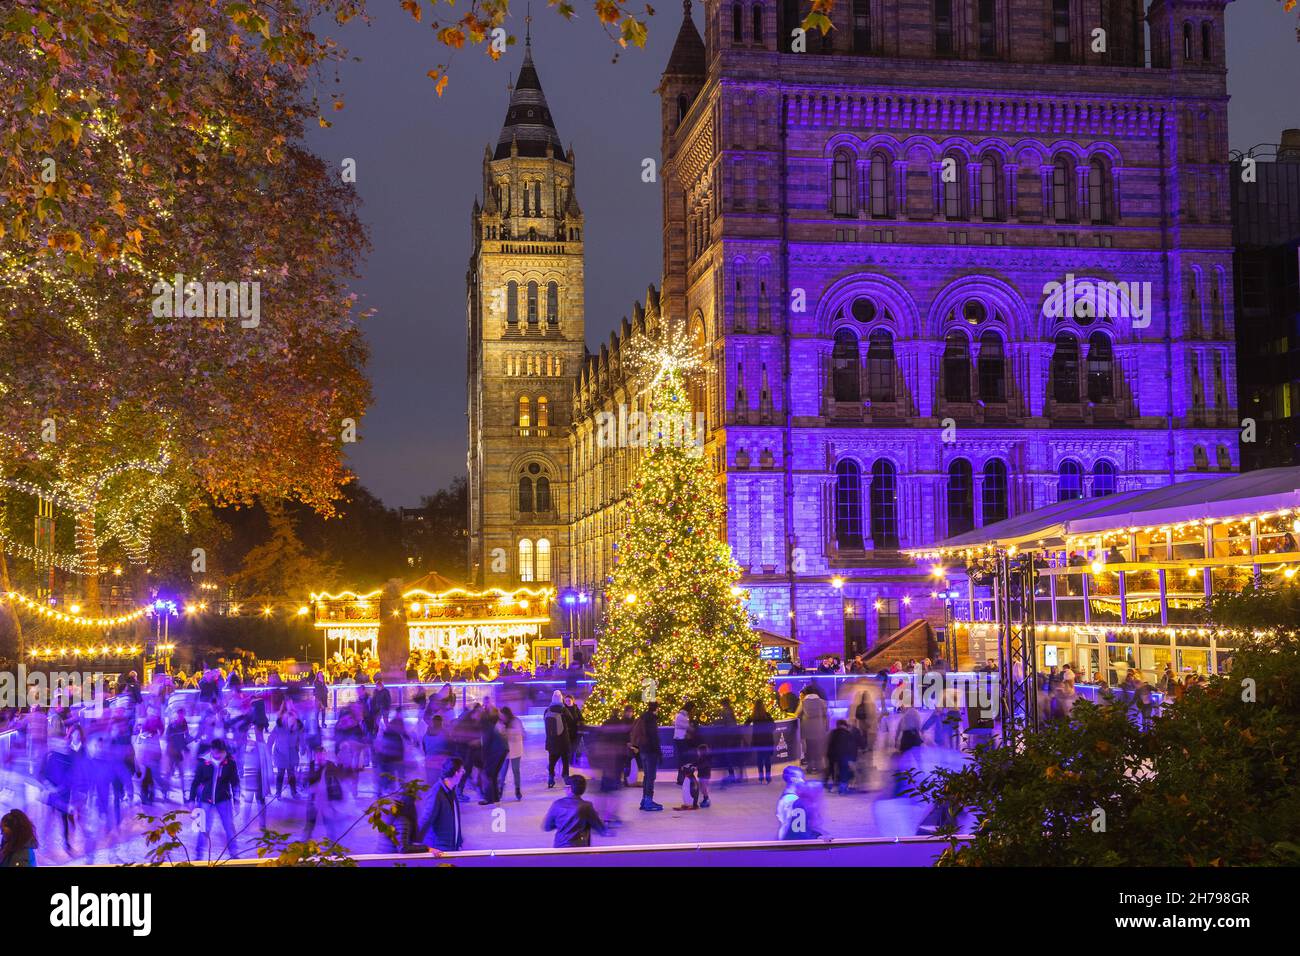 LONDON, UK - 20TH NOV 2021: The outside of the Natural History Museum in London during the Christmas holiday season. Decorations, an ice rink, Christm Stock Photo